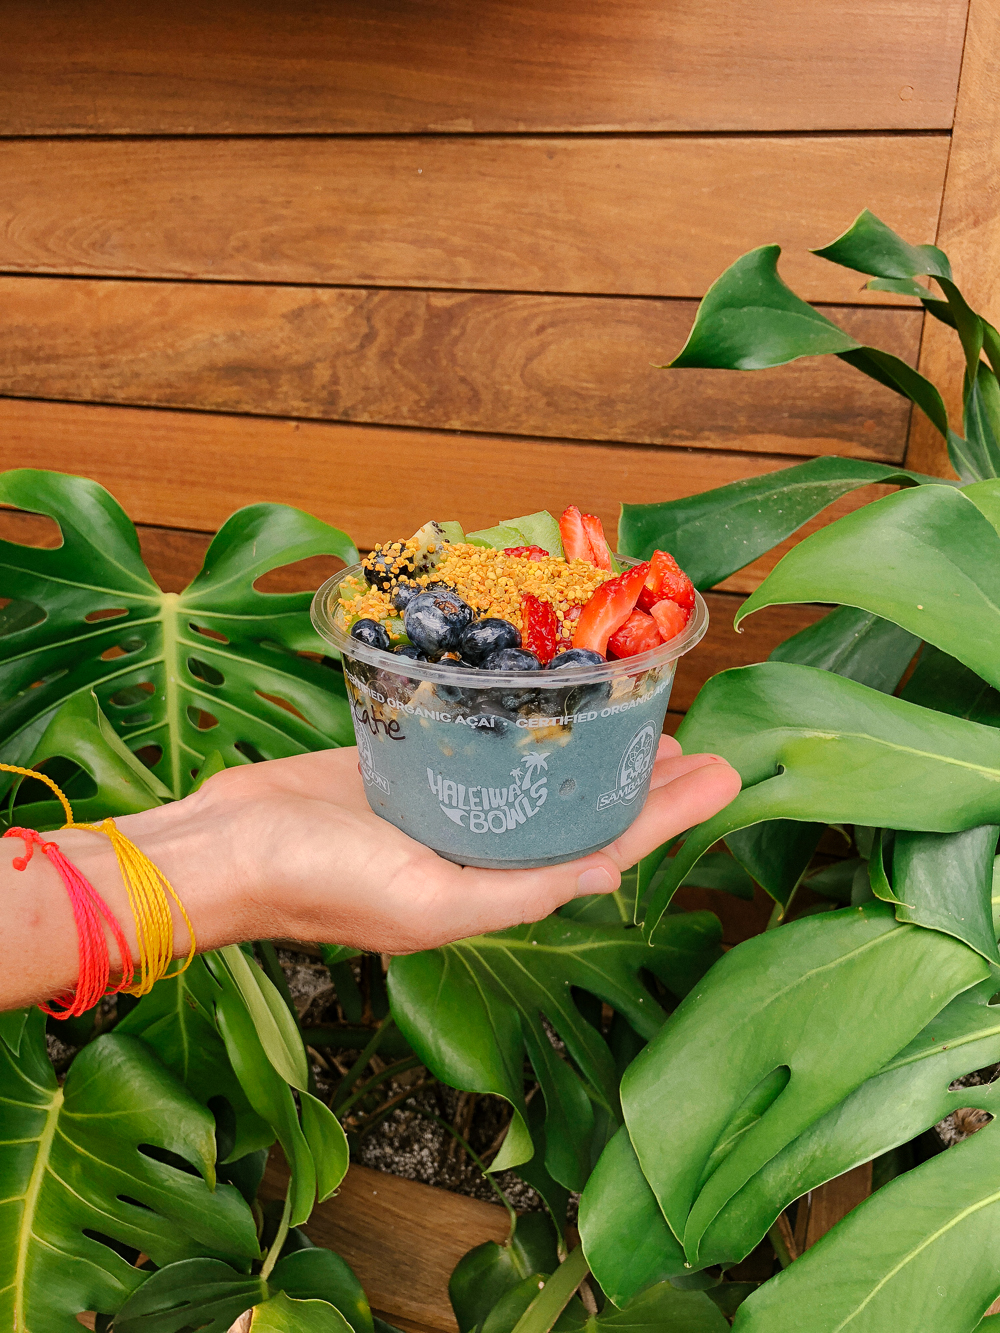 The Ultimate Oahu Travel Guide for the Adventurer - Haleiwa Bowls, Acai Bowls, North Shore Oahu | Sunshine Style